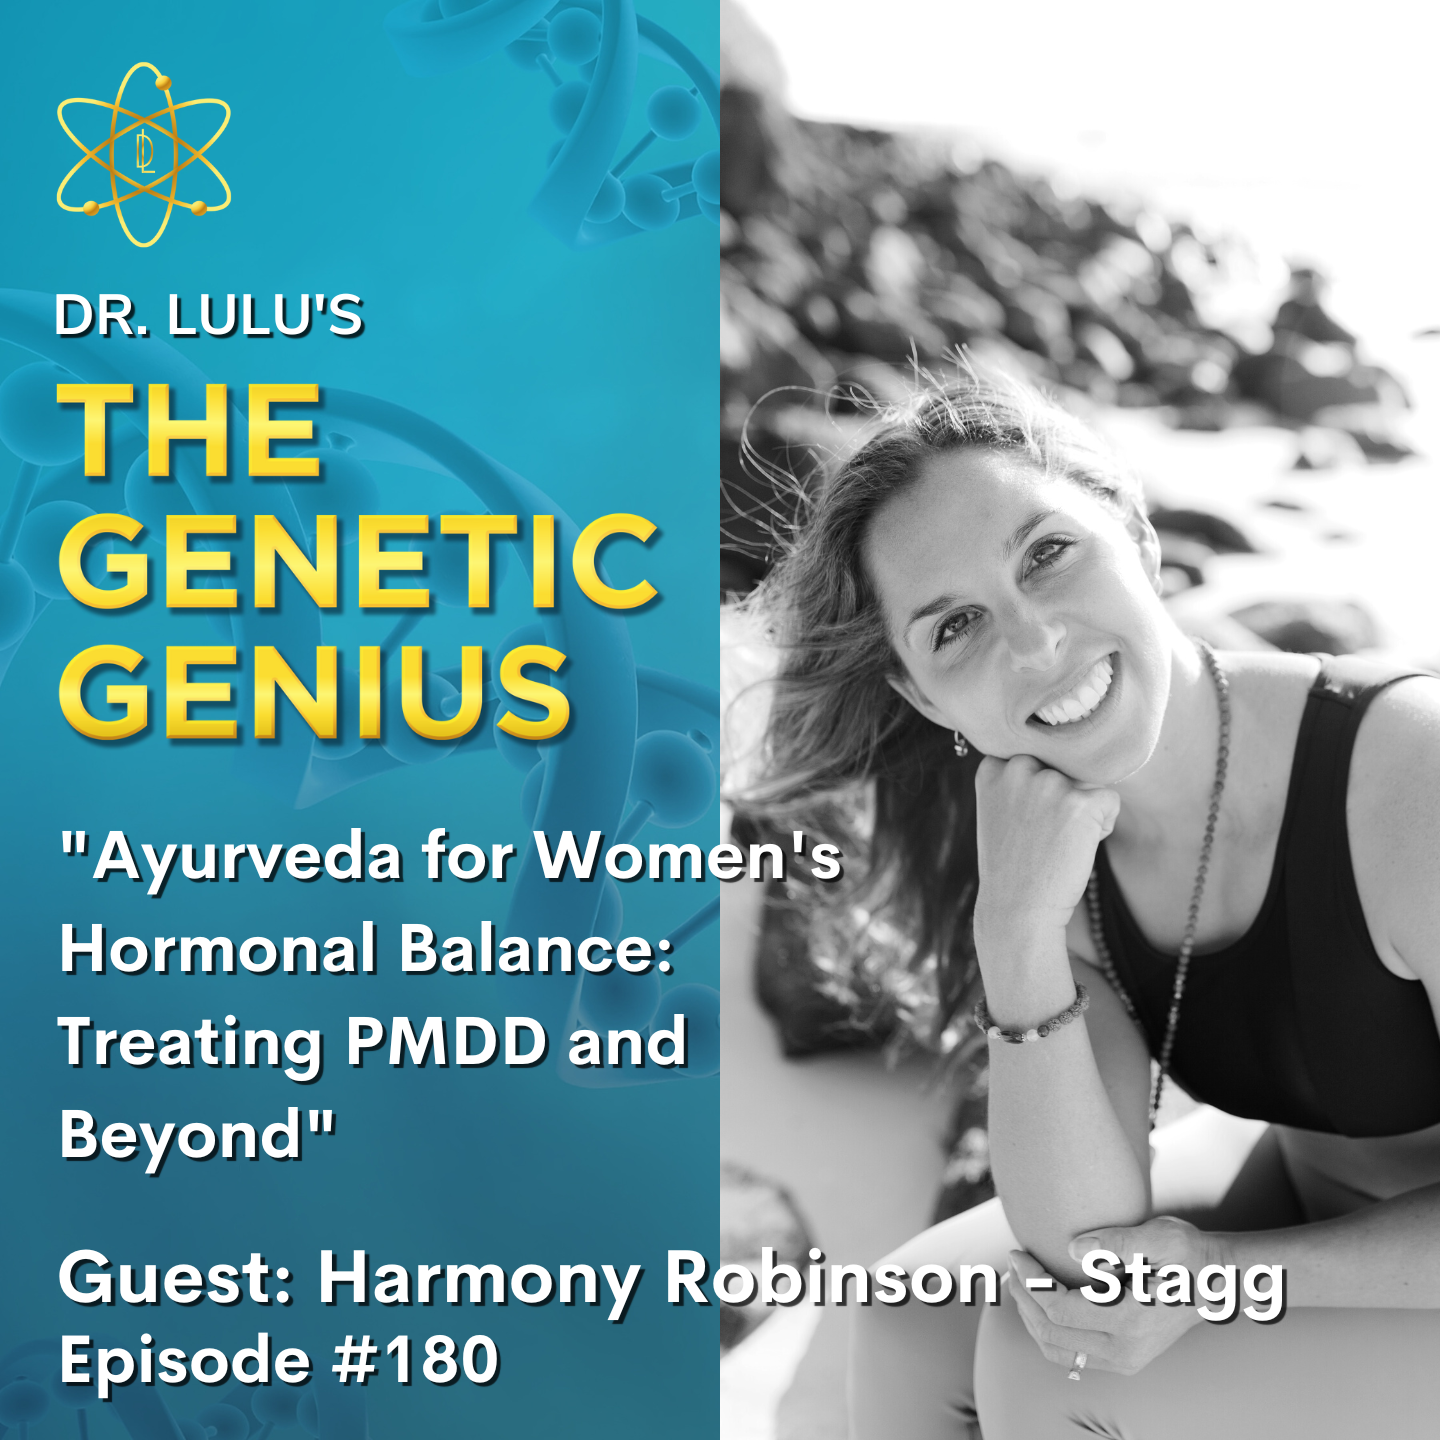 AYURVEDA FOR WOMEN'S HORMONAL BALANCE: TREATING PMDD AND BEYOND WITH HARMONY ROBINSON - STAGG